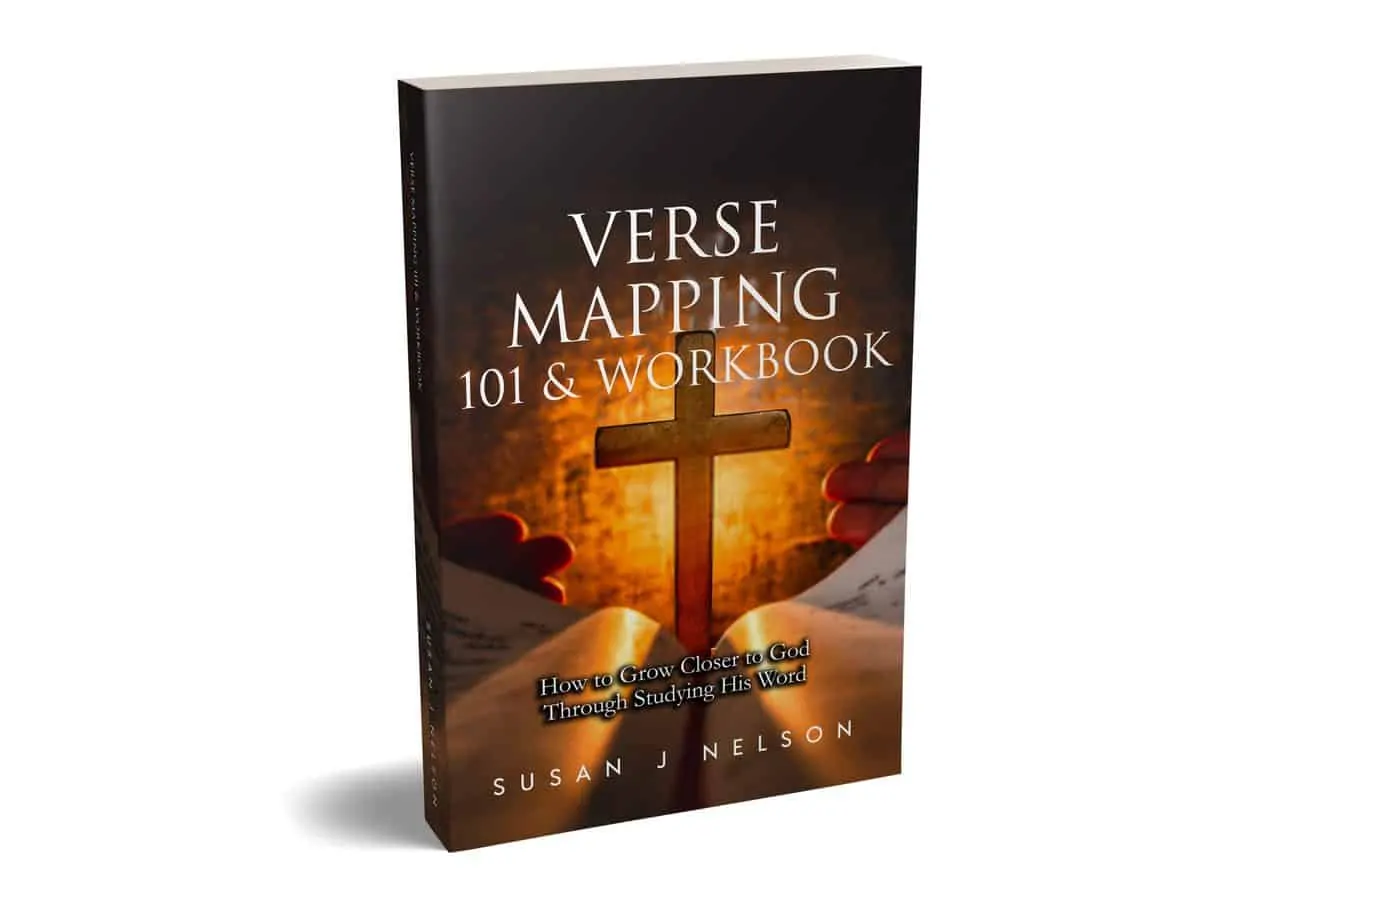 Verse mapping book cover